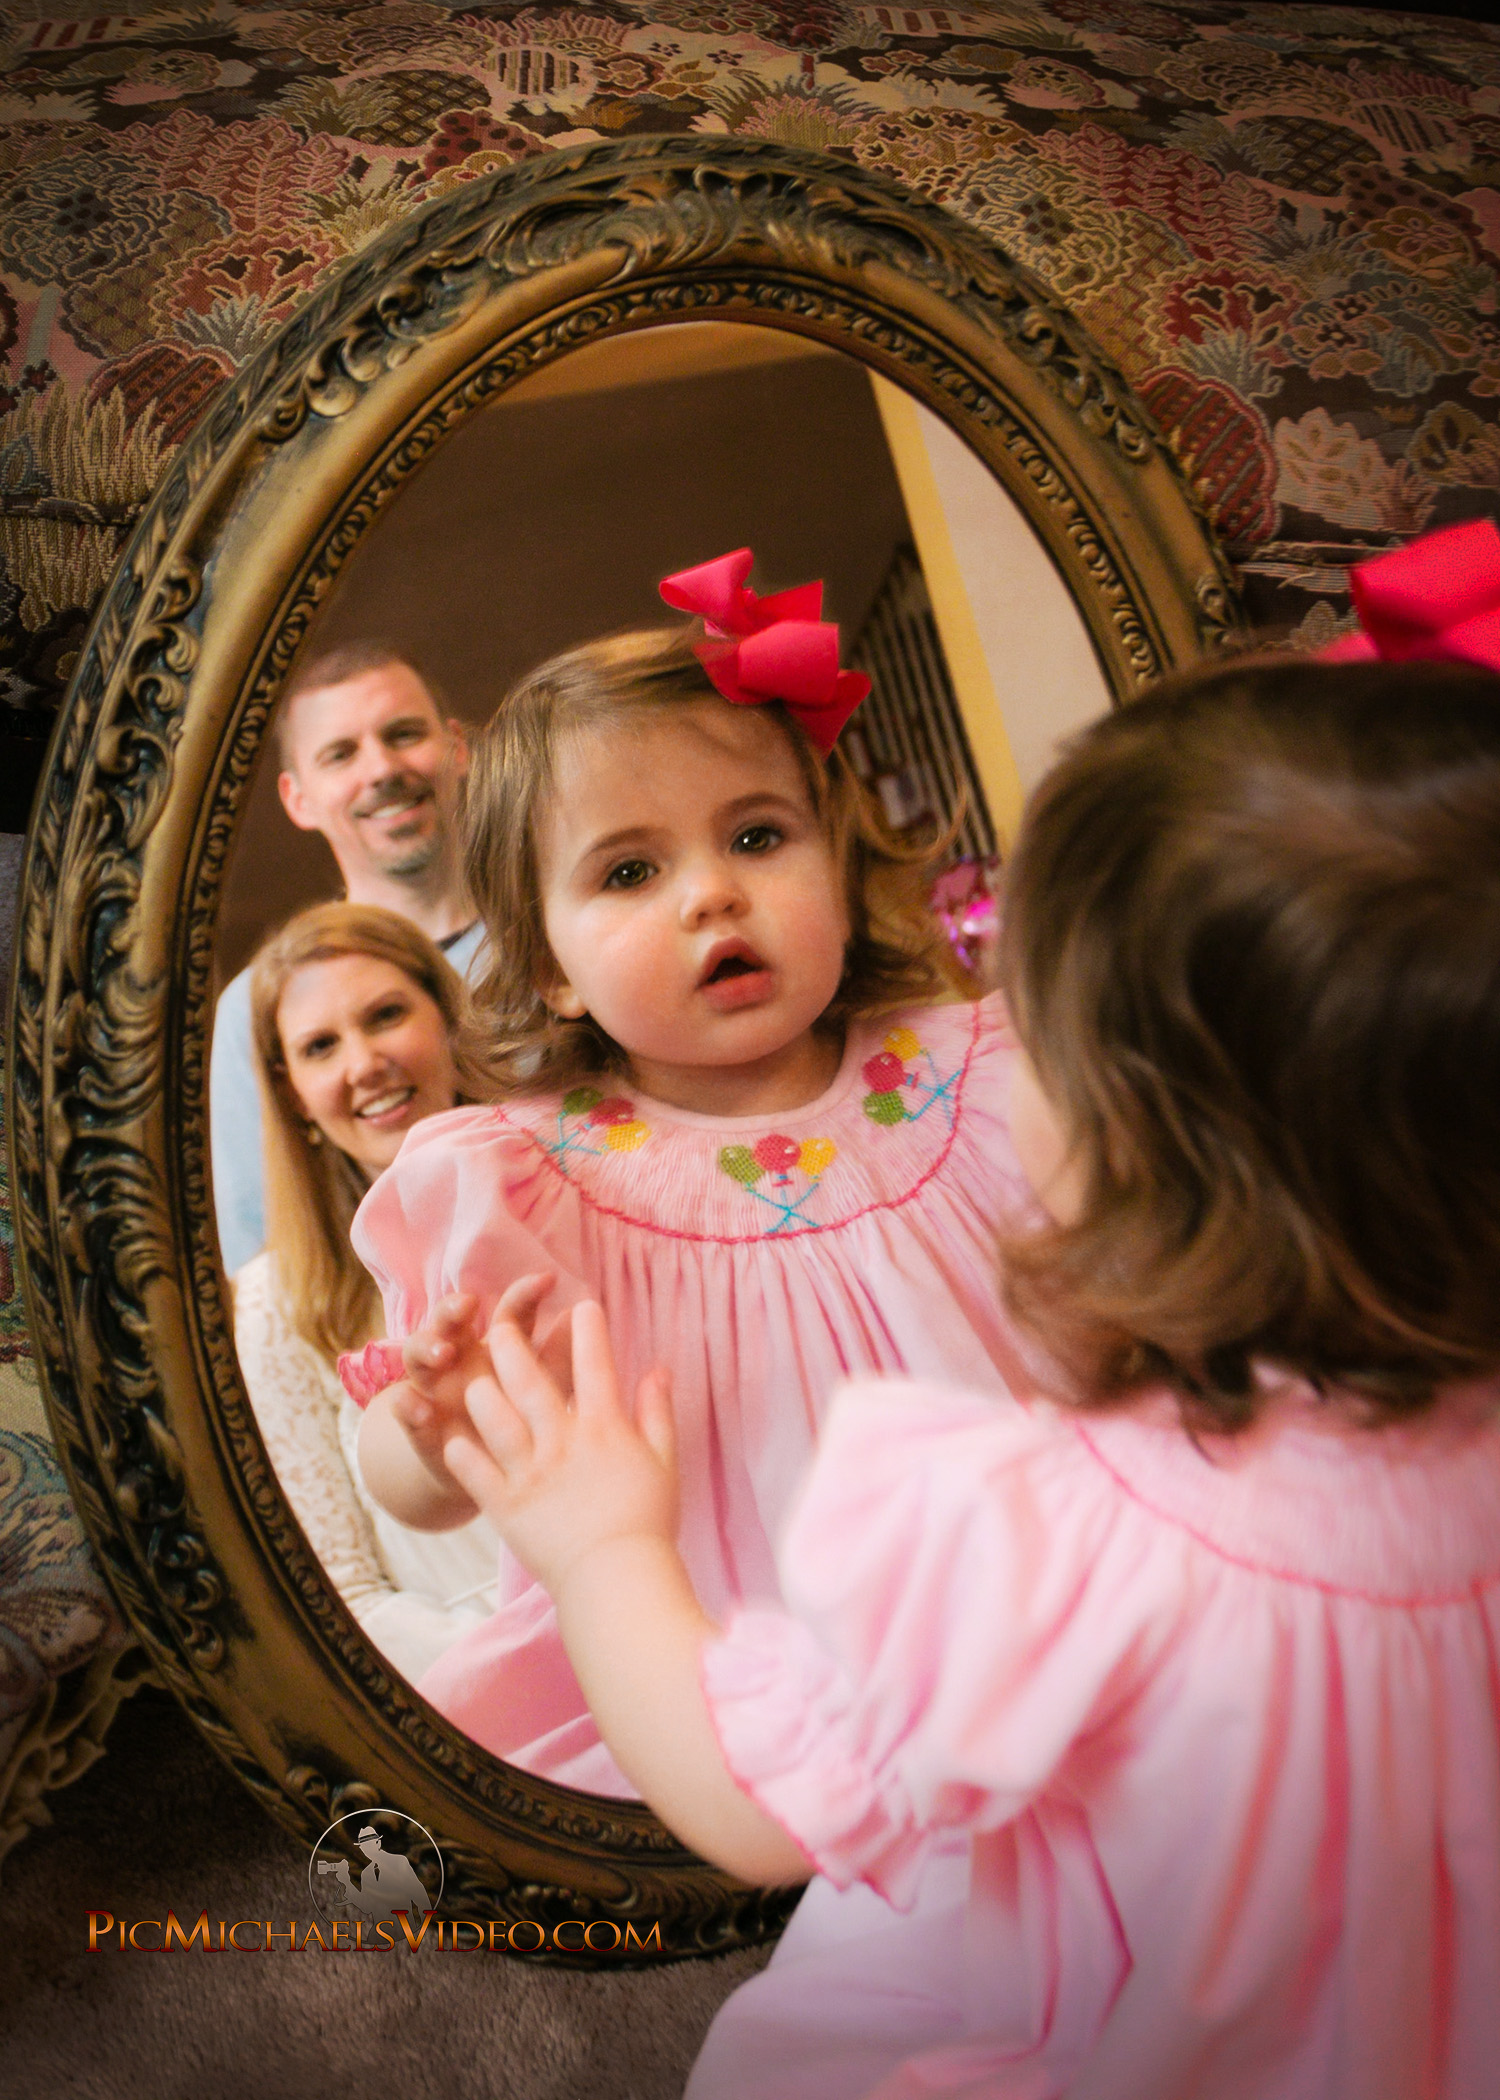 A cute baby looking at her parents in mirror.